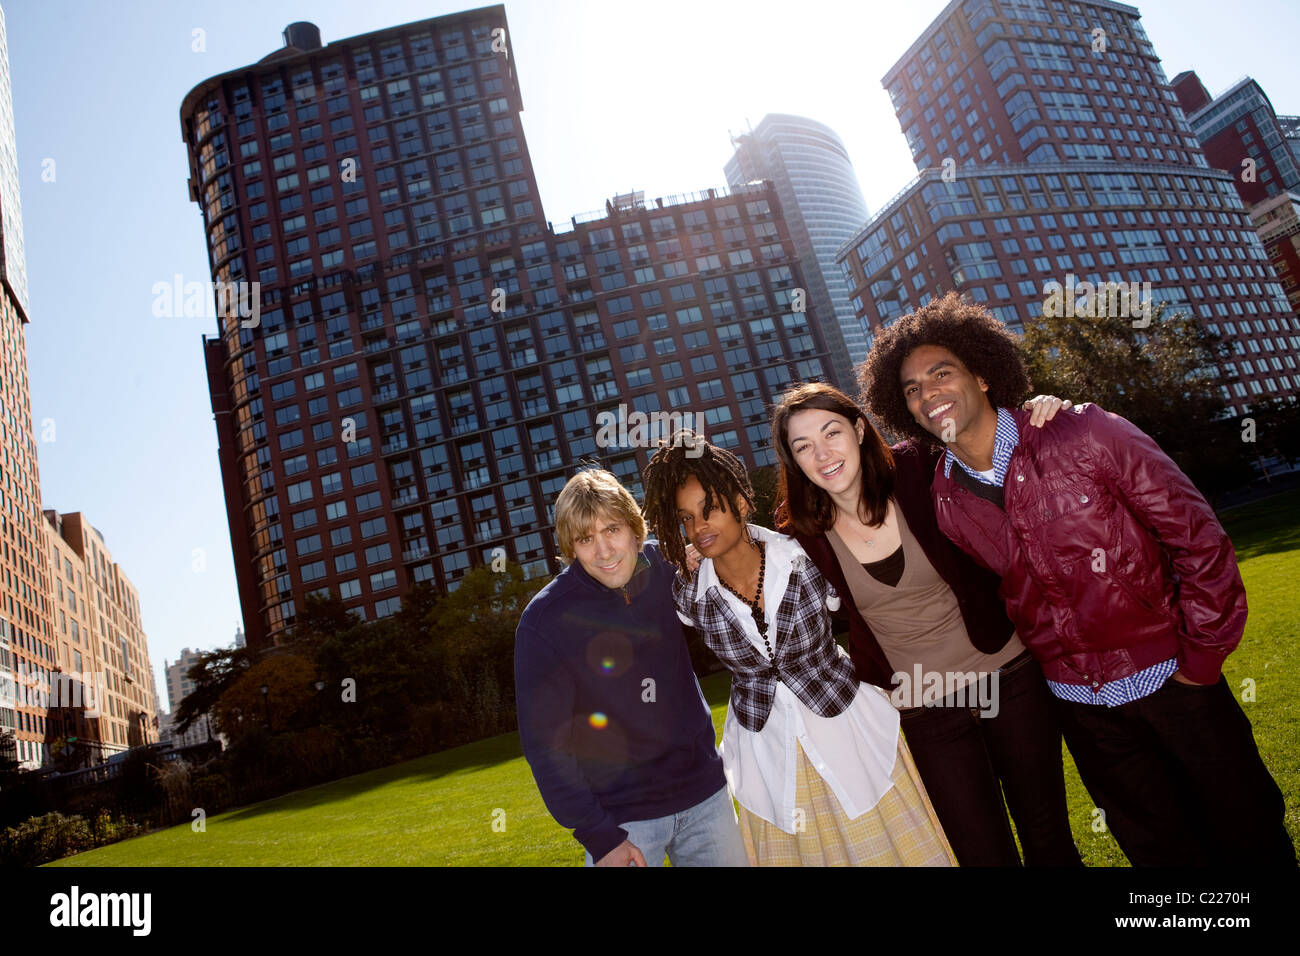 A group of people in front of an apartment building taken into the sun with solar flare Stock Photo